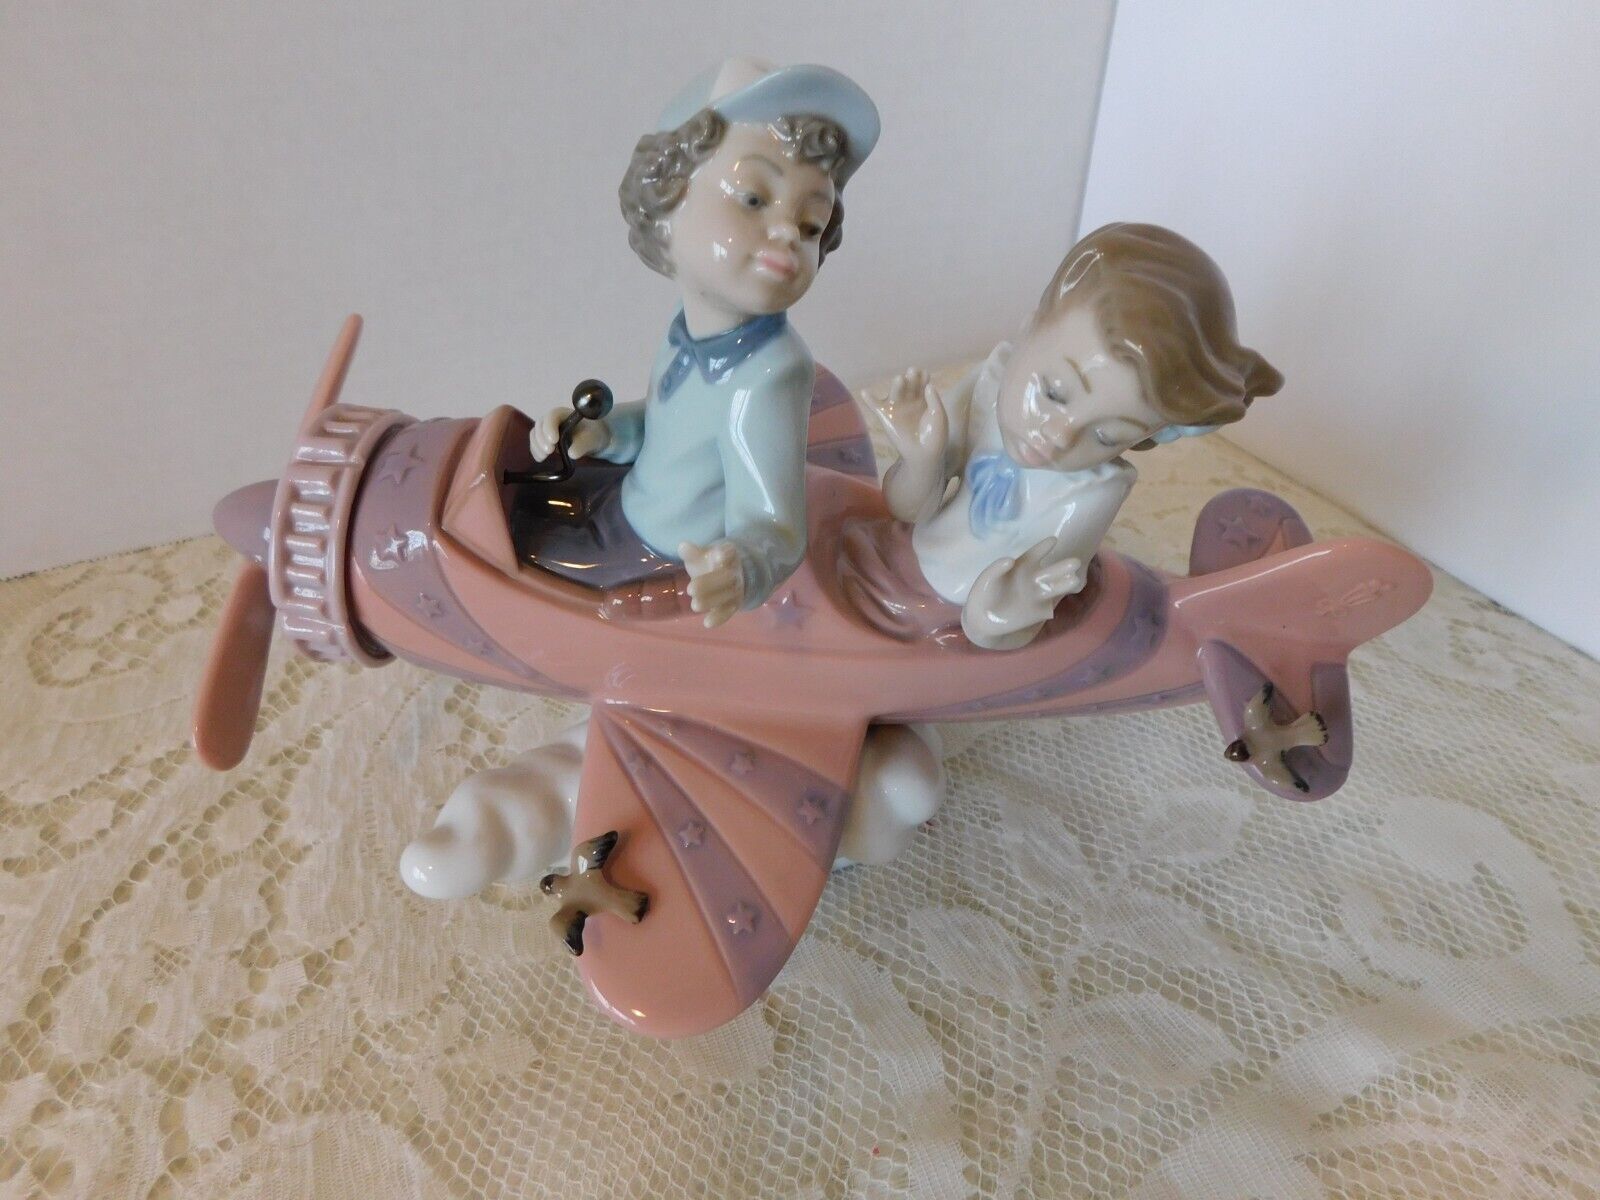 STUNNING LLADRO SPAIN FIGURE #05698 - DON'T LOOK DOWN - AIRPLANE WITH CHILDREN